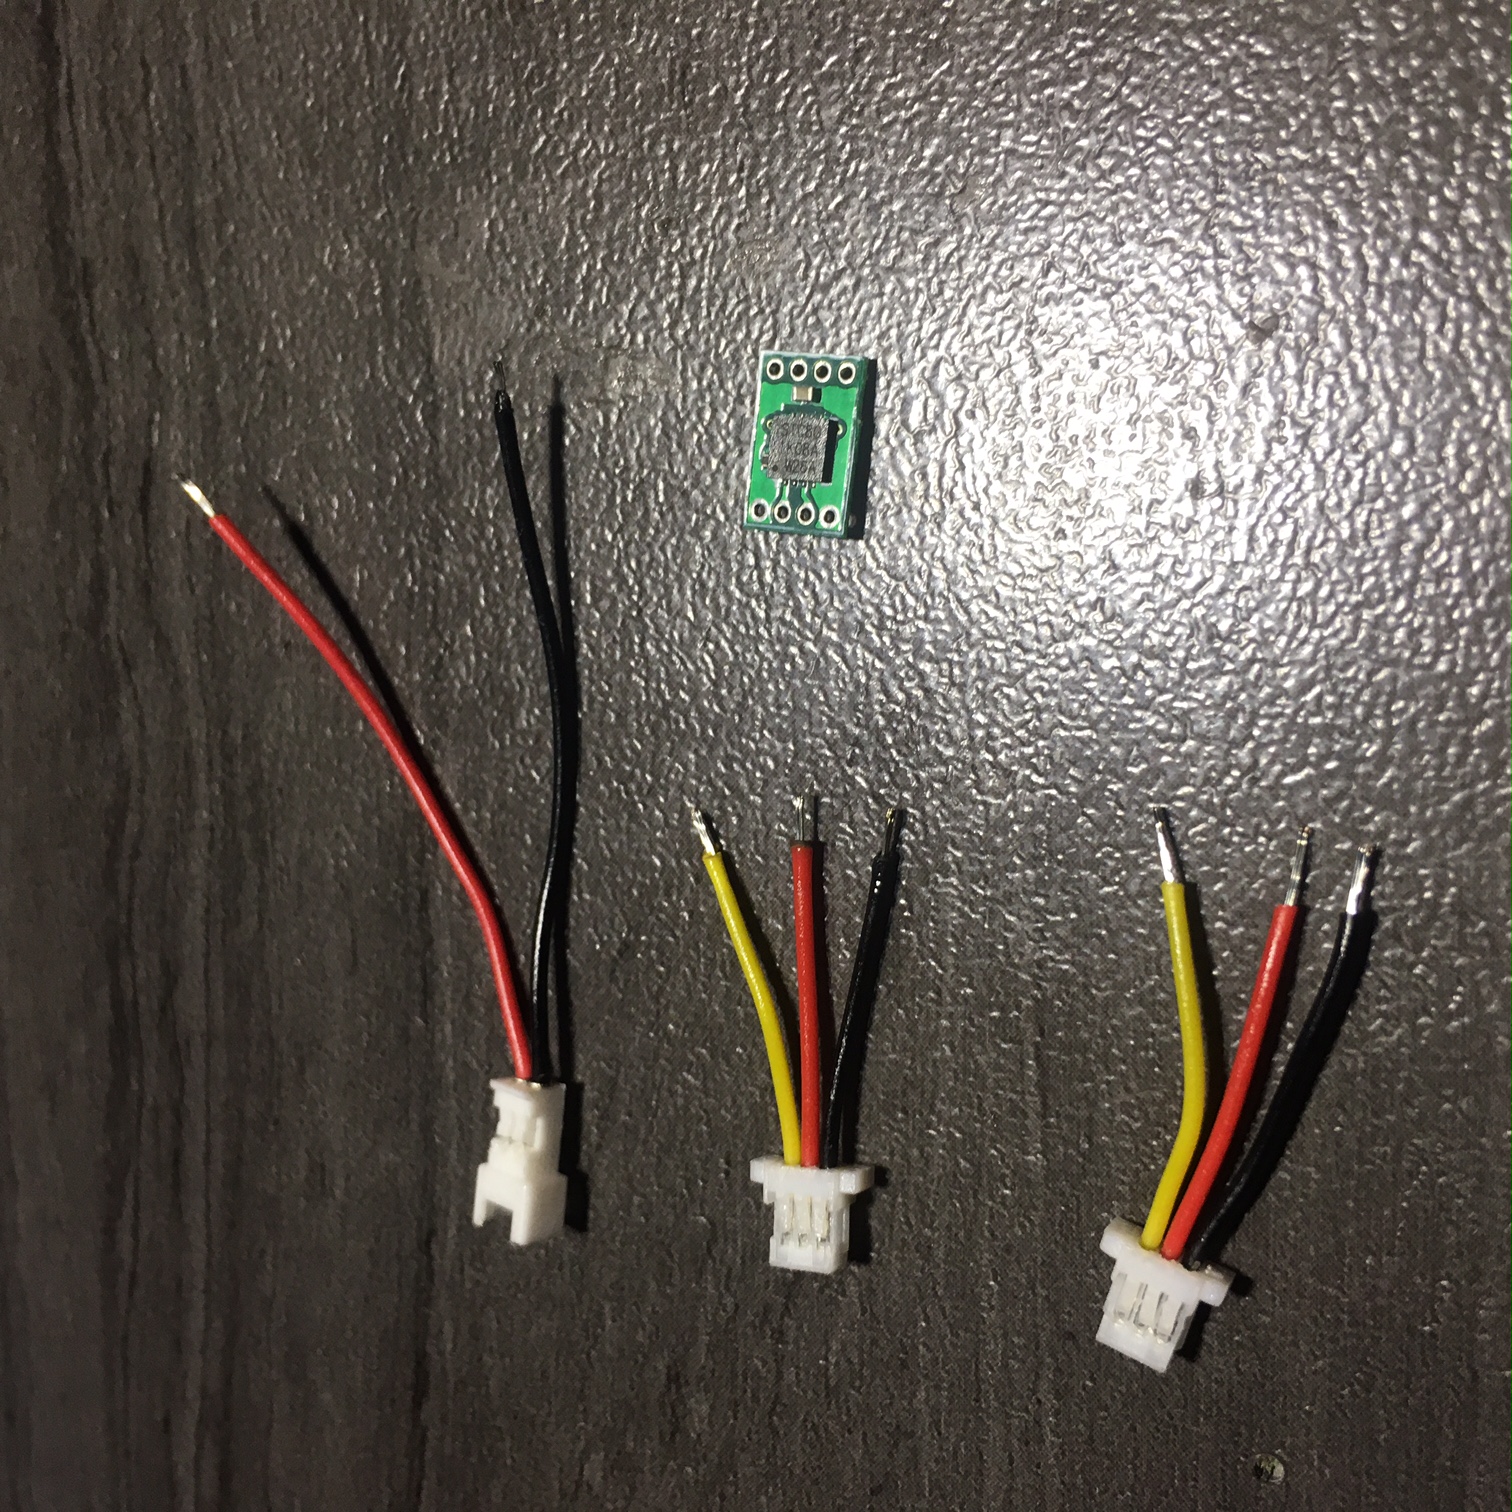 Two 1mm three pin female and One 1.25mm two pin male connectors trimmed to length and tinned with solder are ready for power supply\PPM signal harness configuration and installation. Are connectors shown here are High Q 26 AWG.